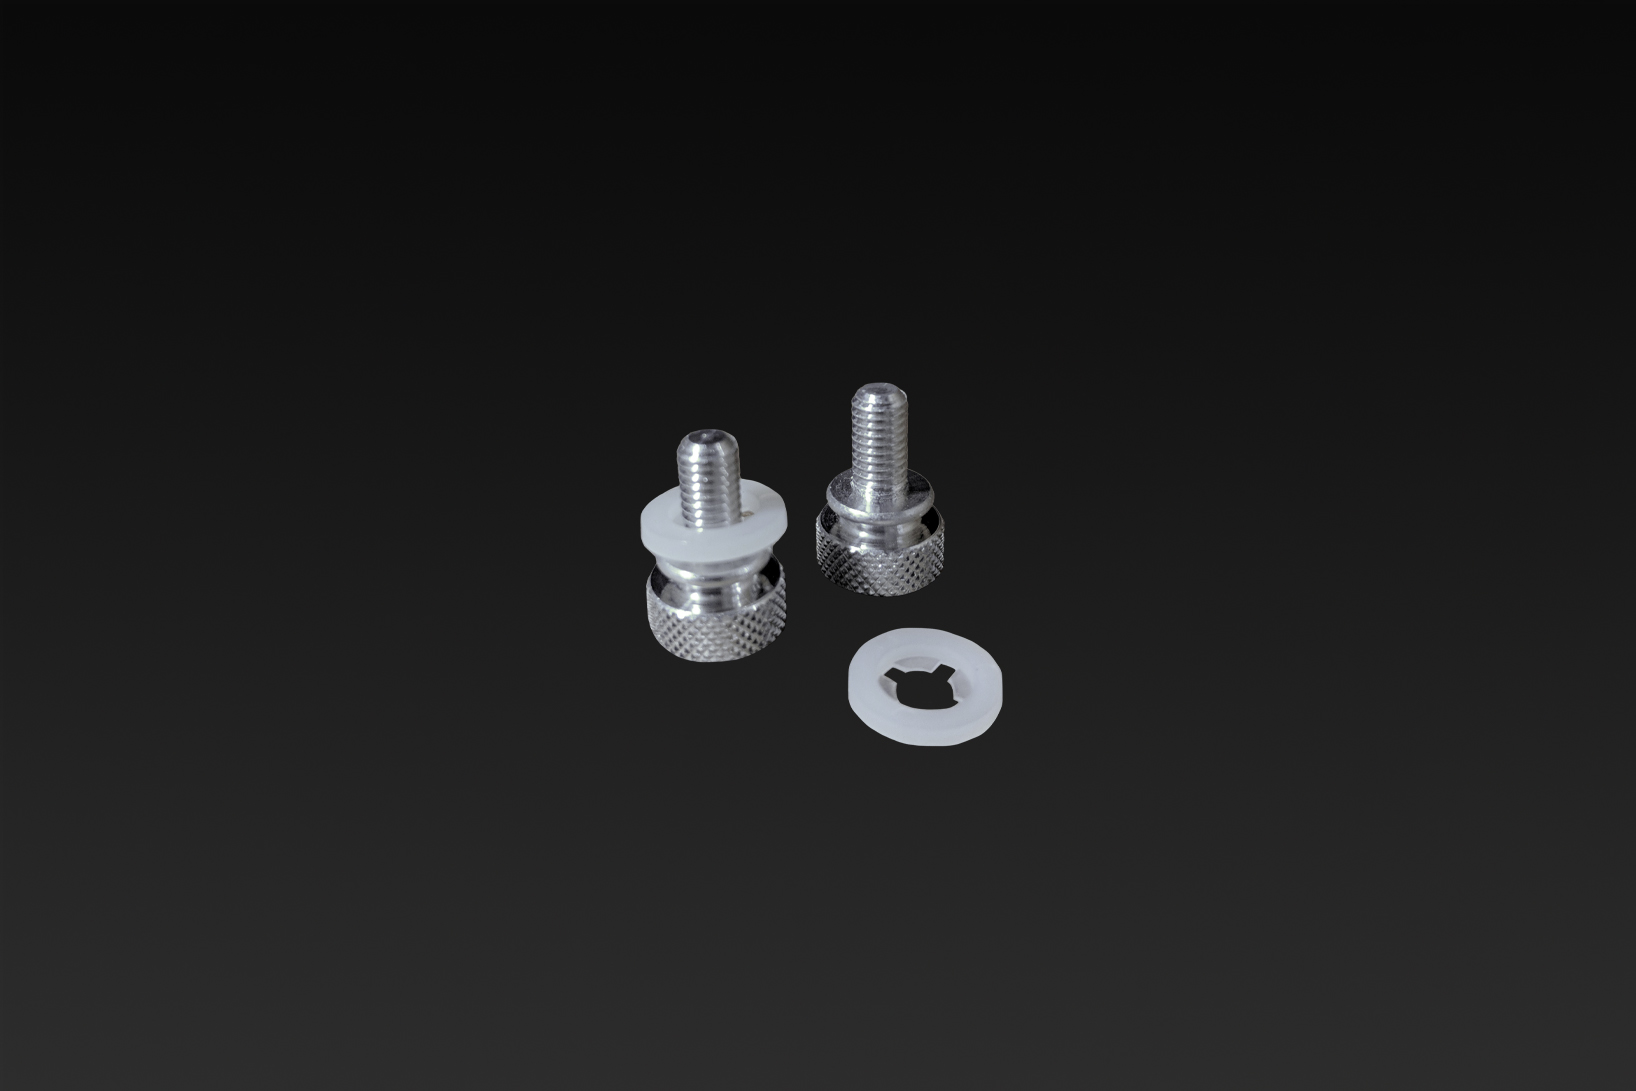 Aluminum thumb screw kit for enclosures by AttaBox®